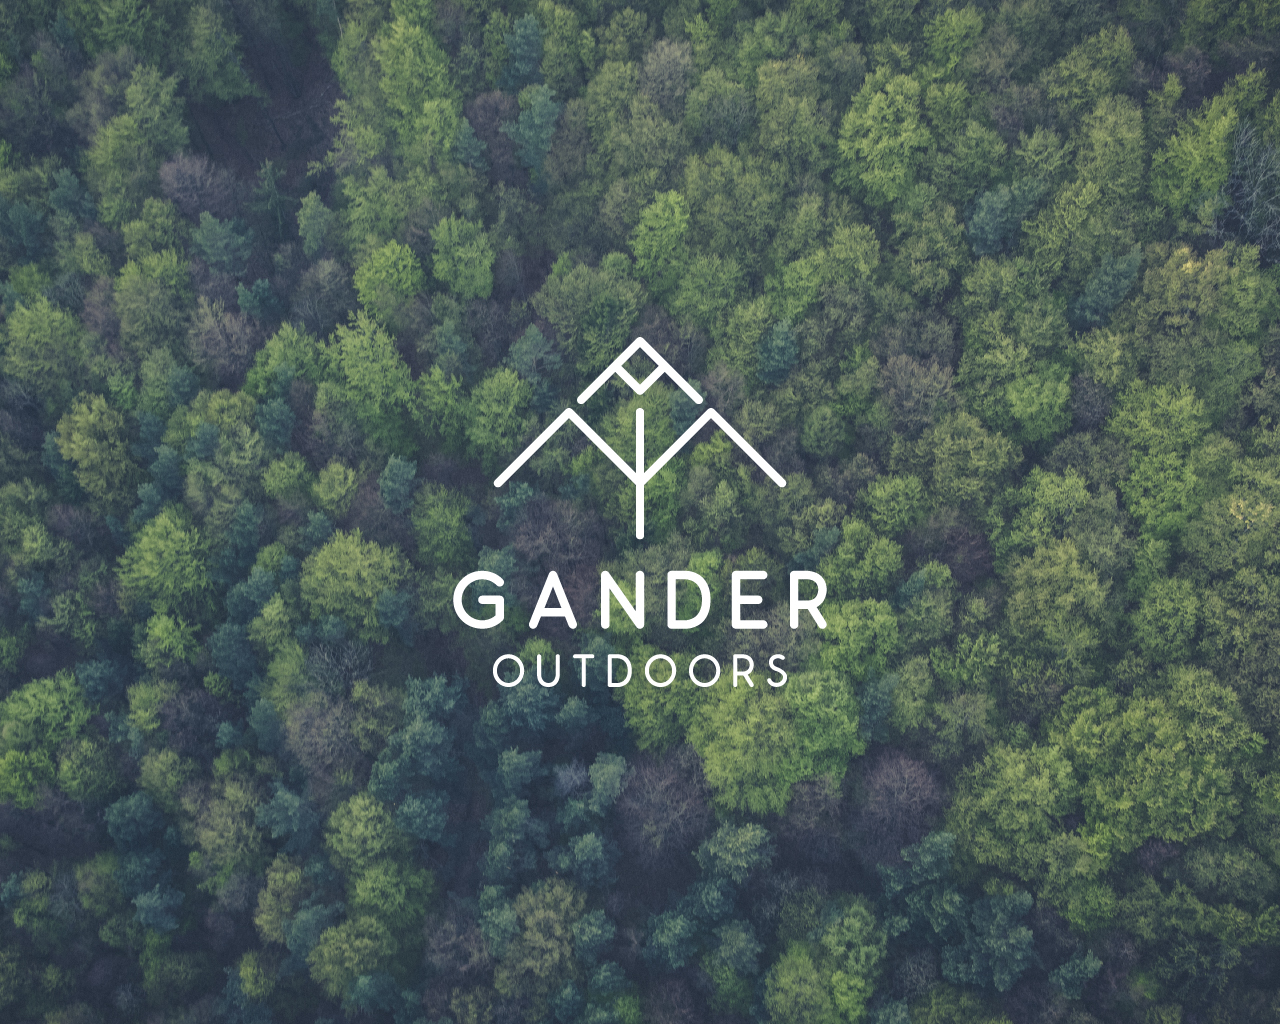 Here is a logo design I submitted to the Gander Outdoors logo redesign cont...